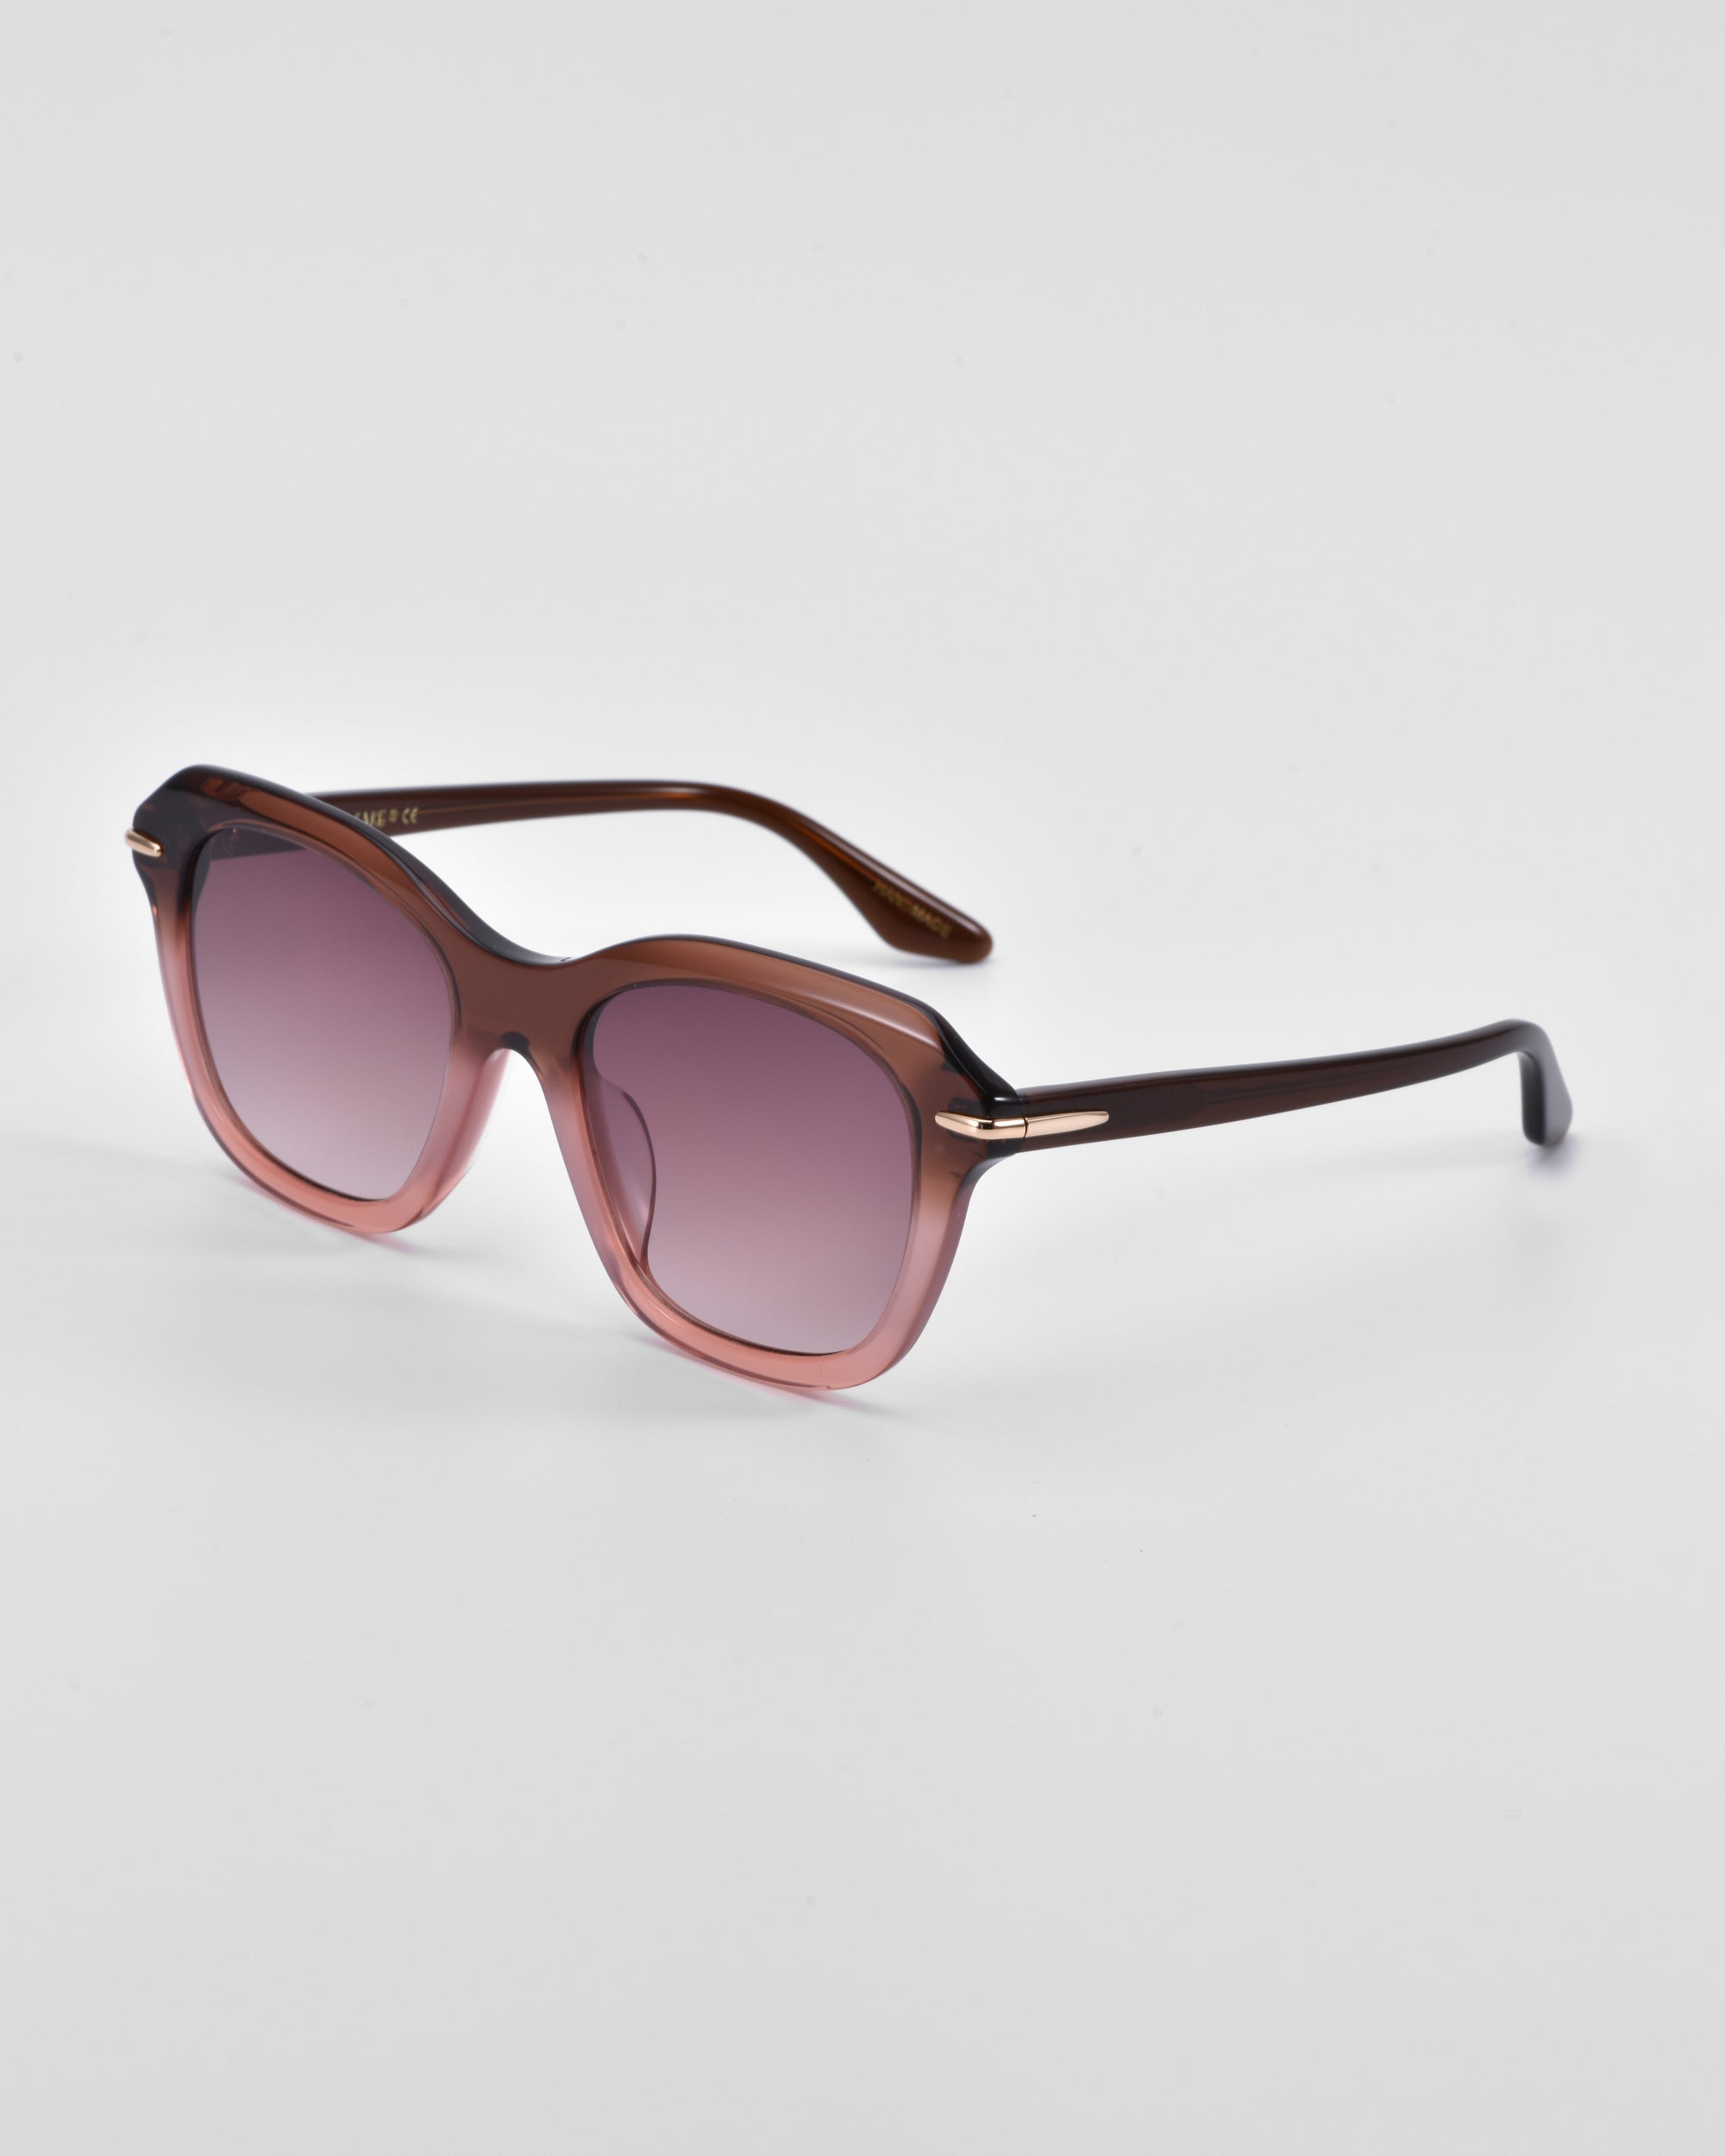 A pair of oversized cat-eye sunglasses with gradient lenses that transition from dark to light pink. The frame is a sleek, dark brown with 18-karat gold plating near the hinges. The design is chic and modern, making it a true statement piece suitable for both casual and formal wear. Introducing "Helene" by For Art's Sake®.